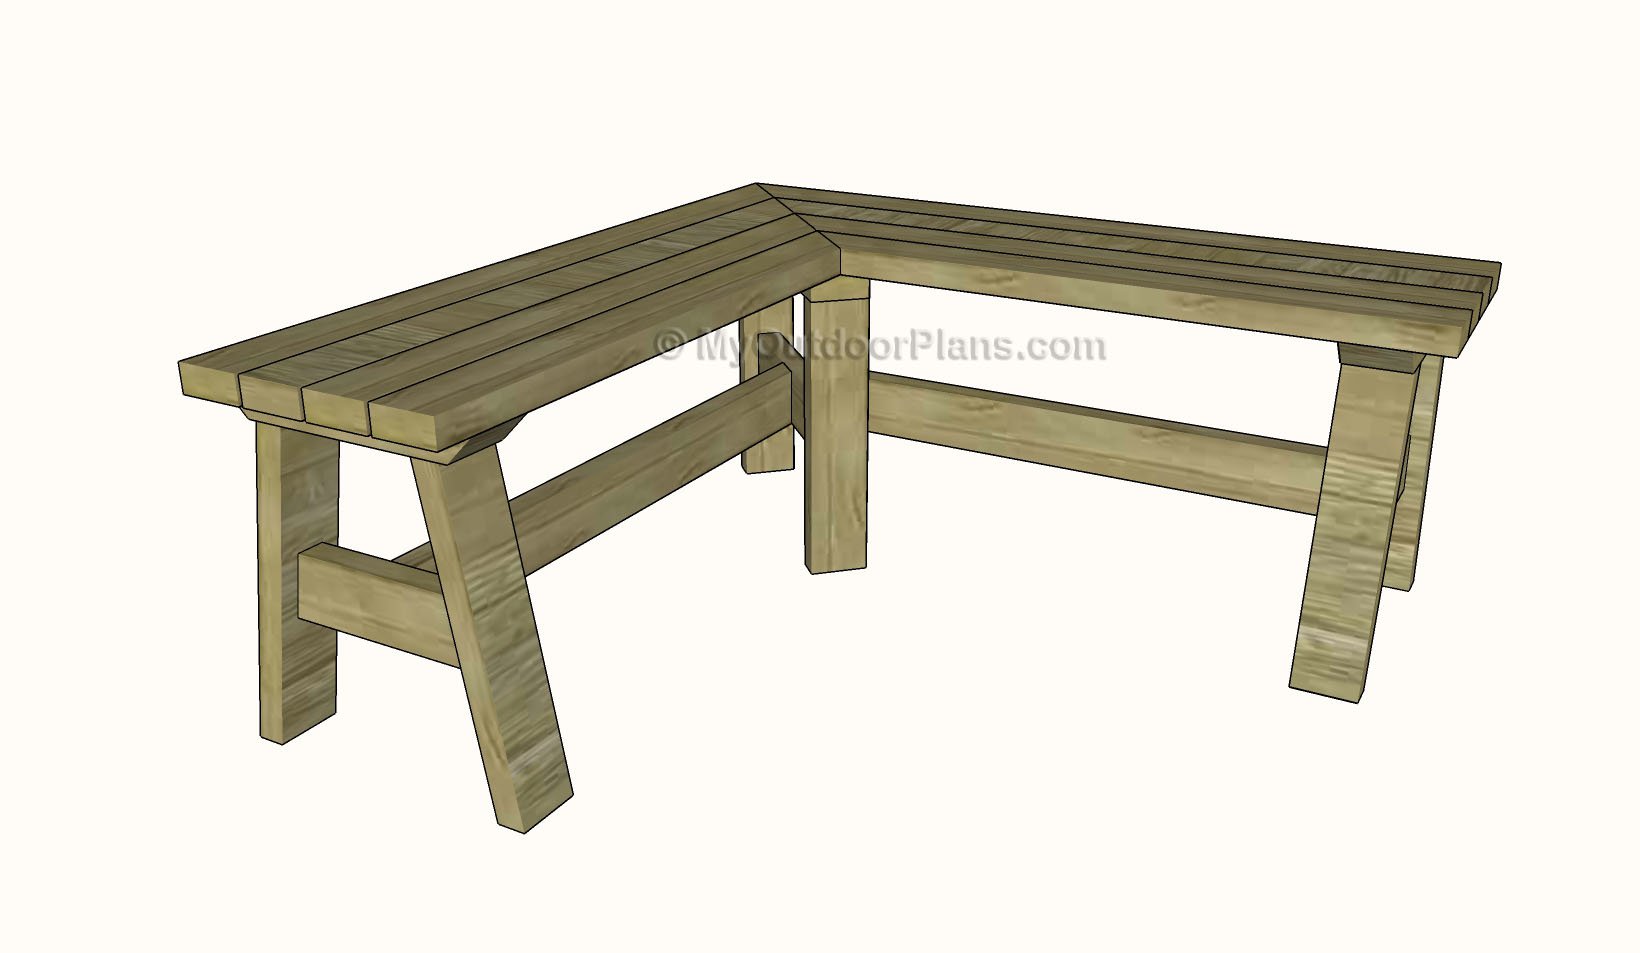 Corner Bench Plans  Free Outdoor Plans - DIY Shed, Wooden Playhouse 